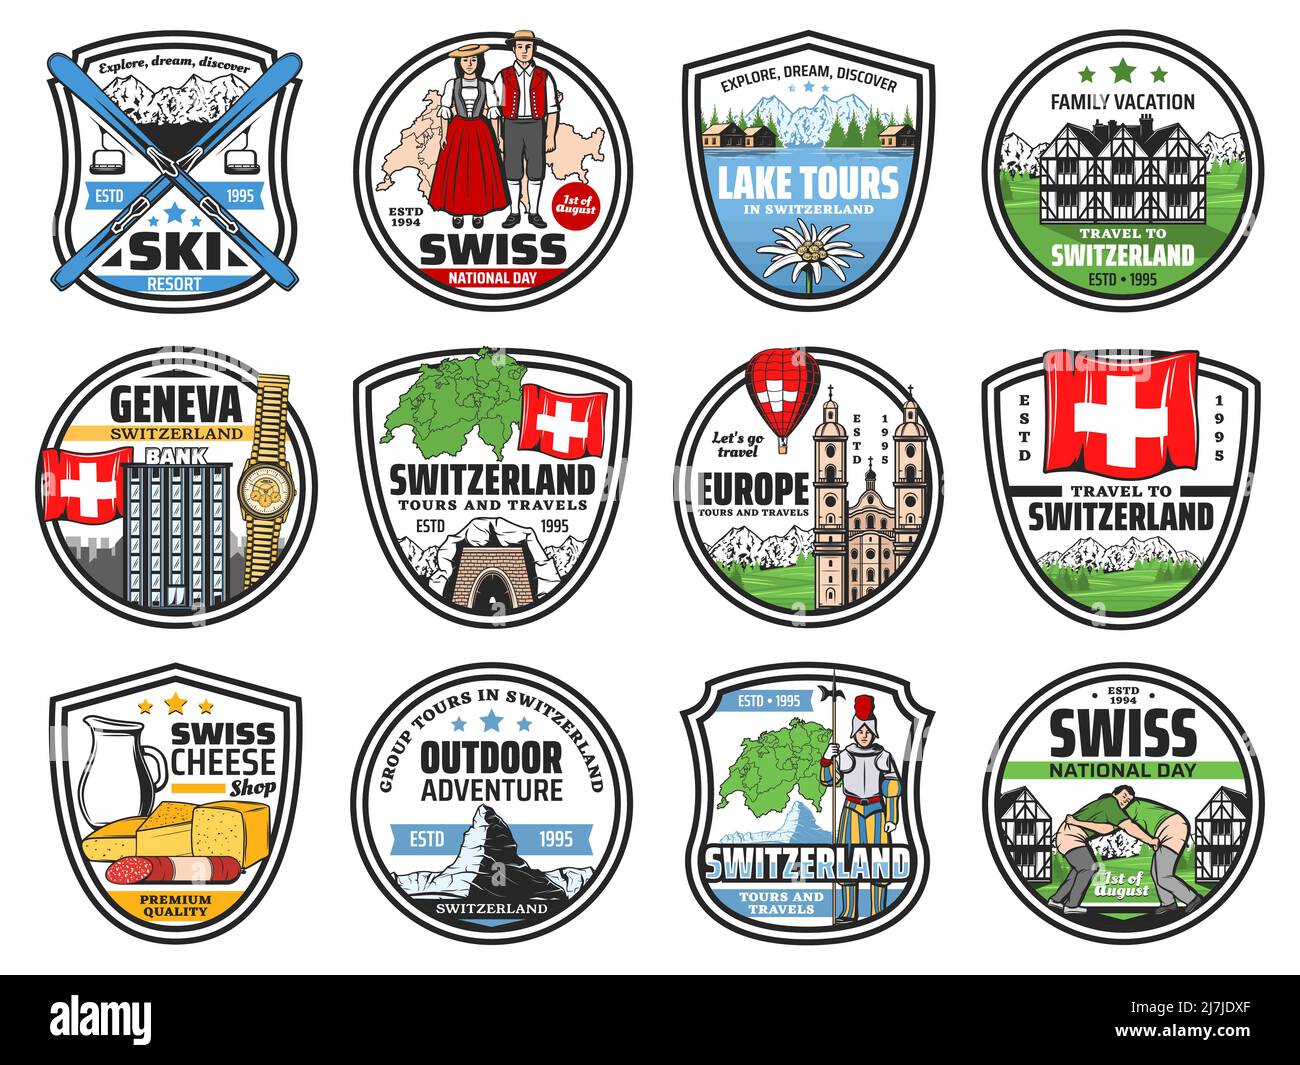 Switzerland travel and Swiss landmarks icons and tourism attraction vector emblems. Switzerland flag and map, national schwingen wrestling culture, tours and trips to Alps, Geneva banks and watches Stock Vector